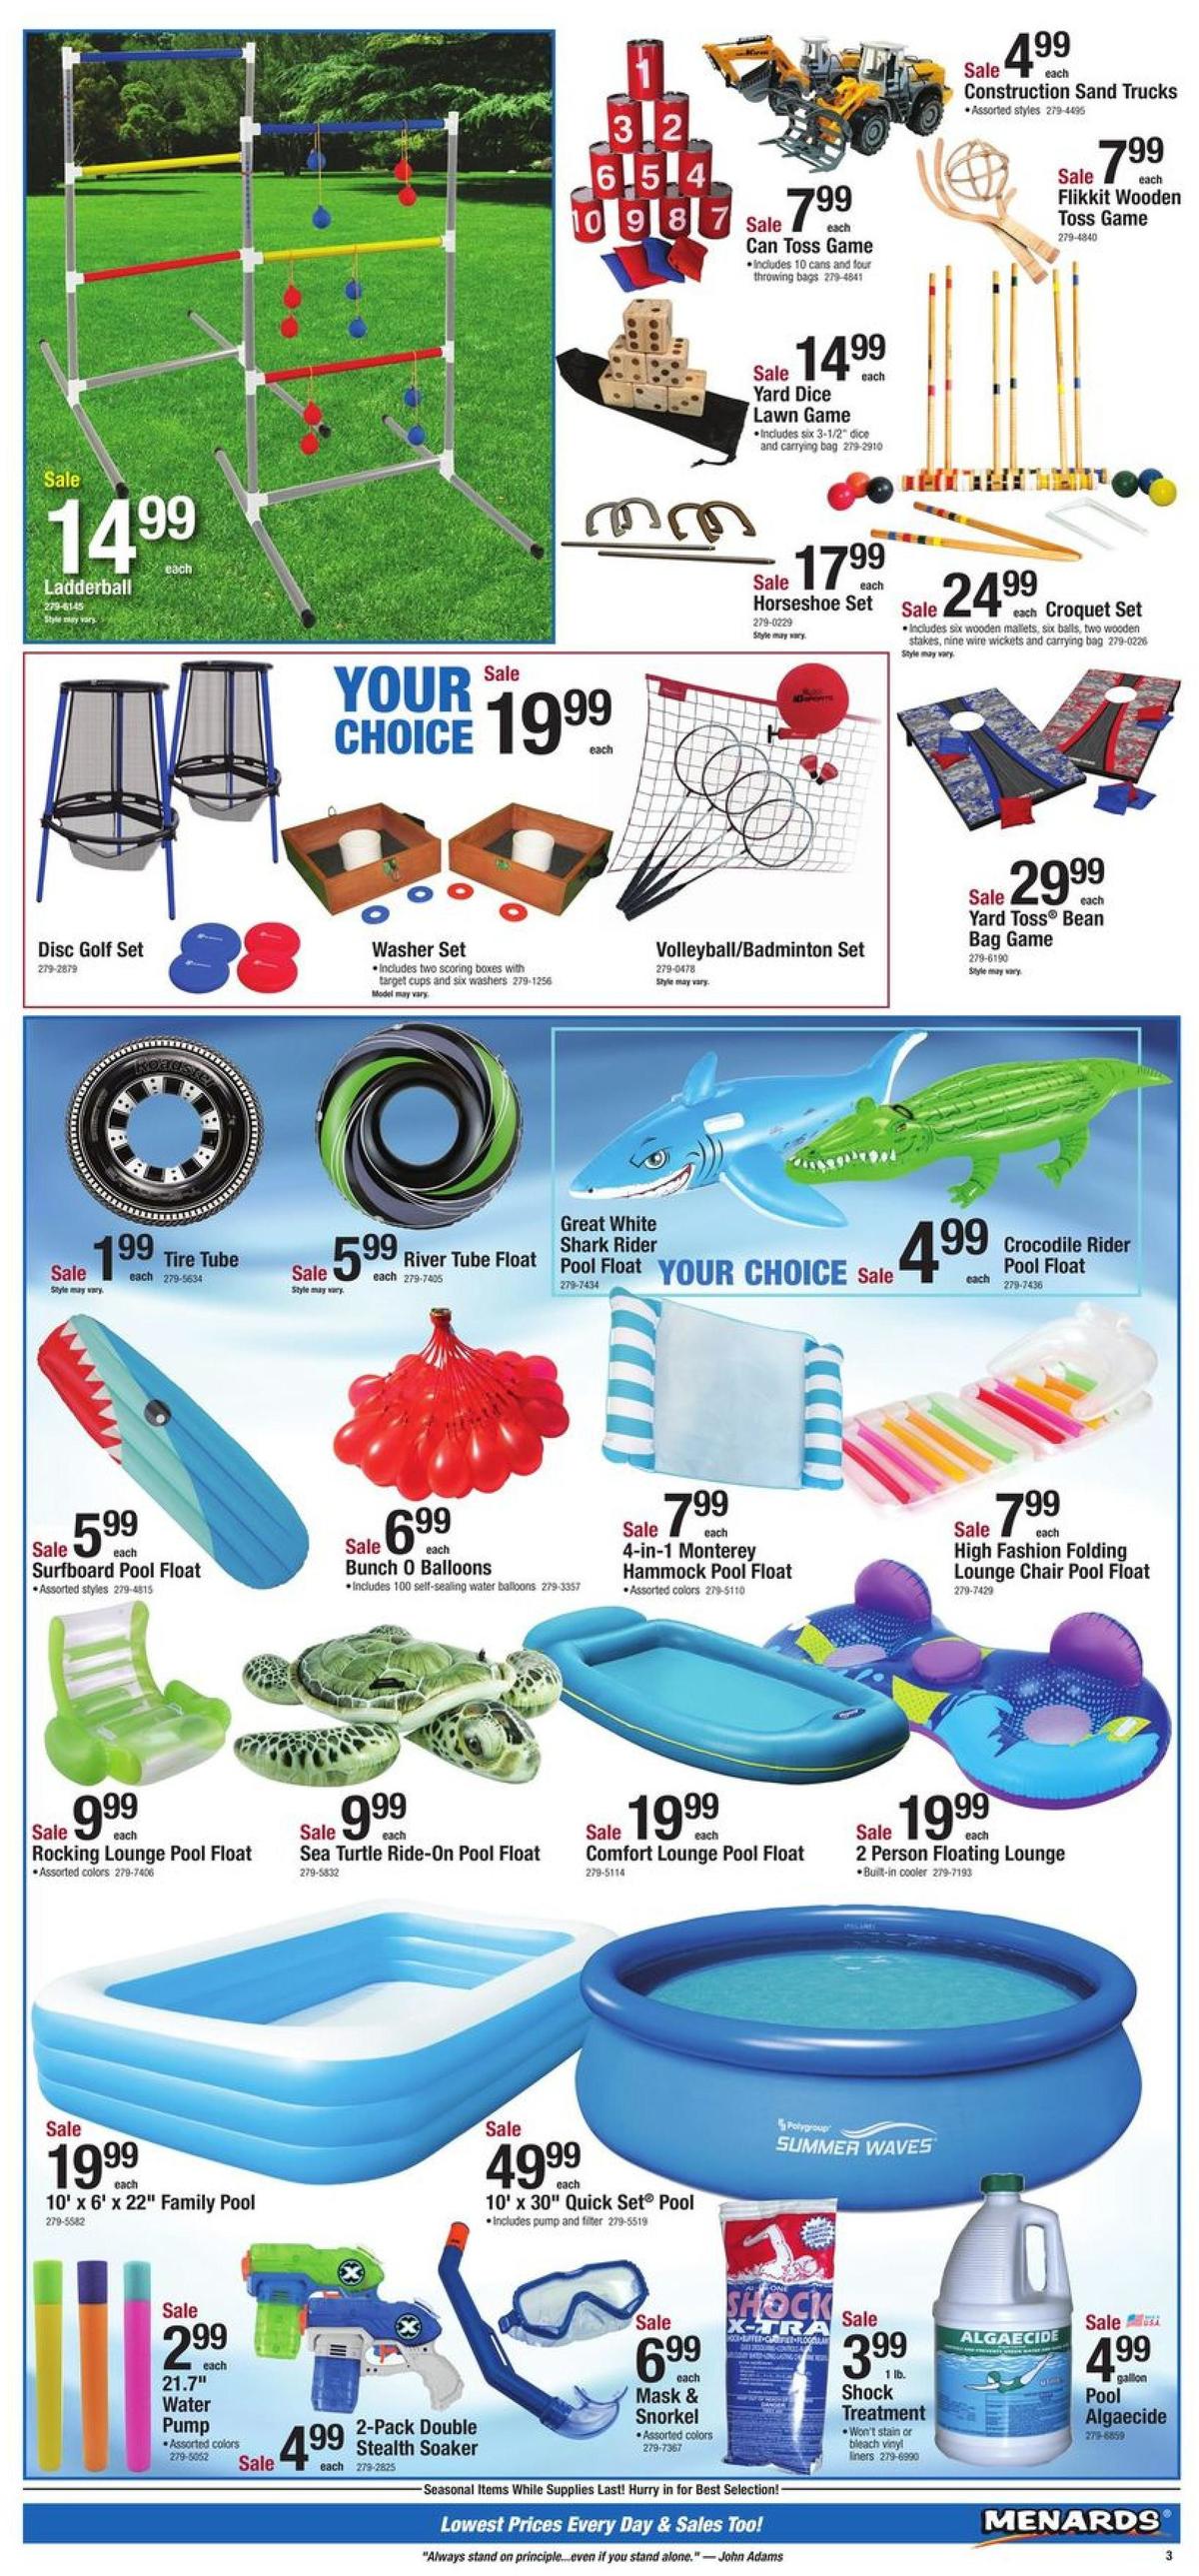 Menards 4th of July Sale - Outdoor Gear Weekly Ad from June 26